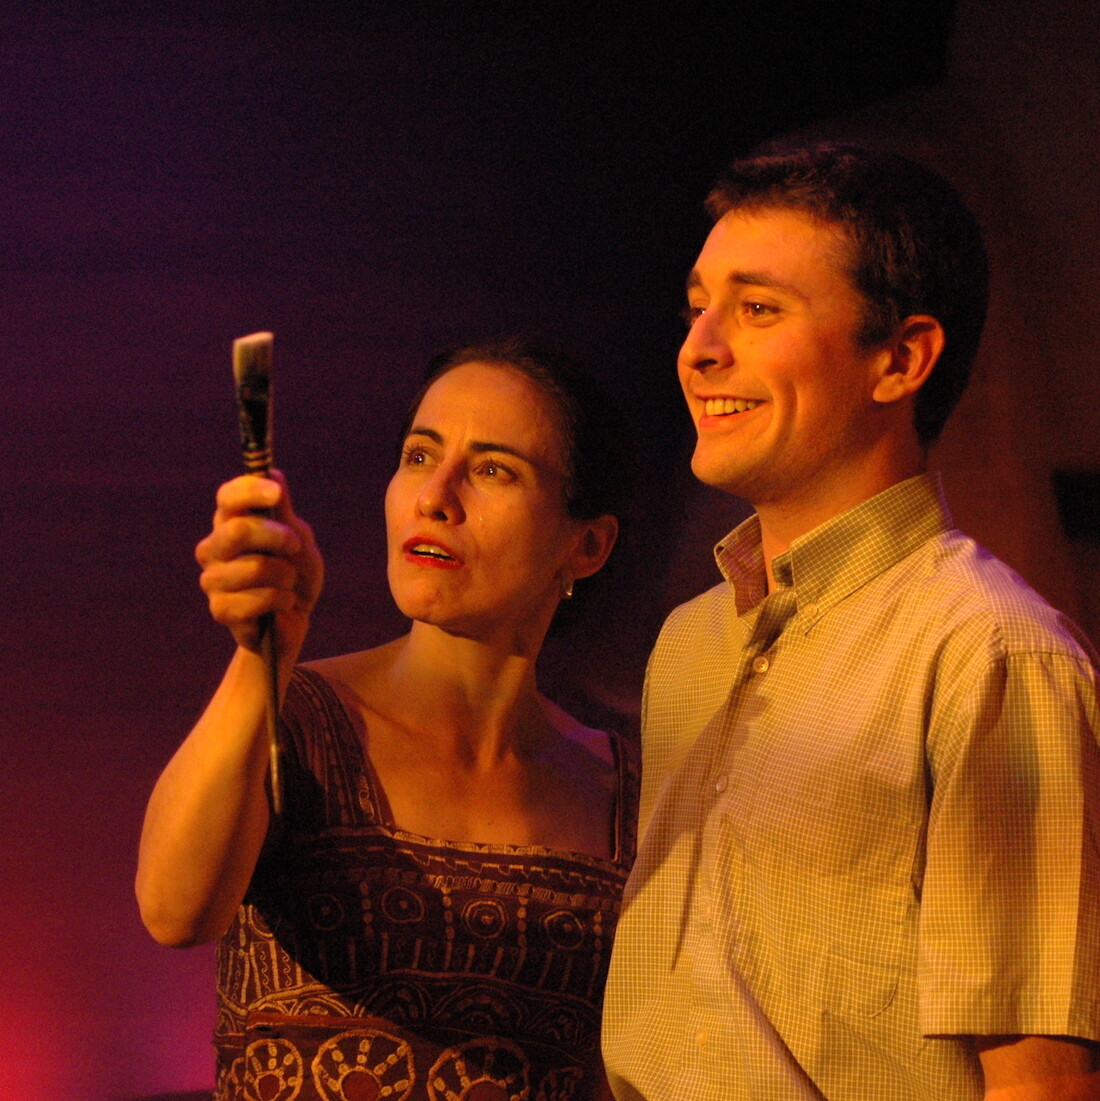 A woman holds a paintbrush and stares at it, along with a man standing next to her.